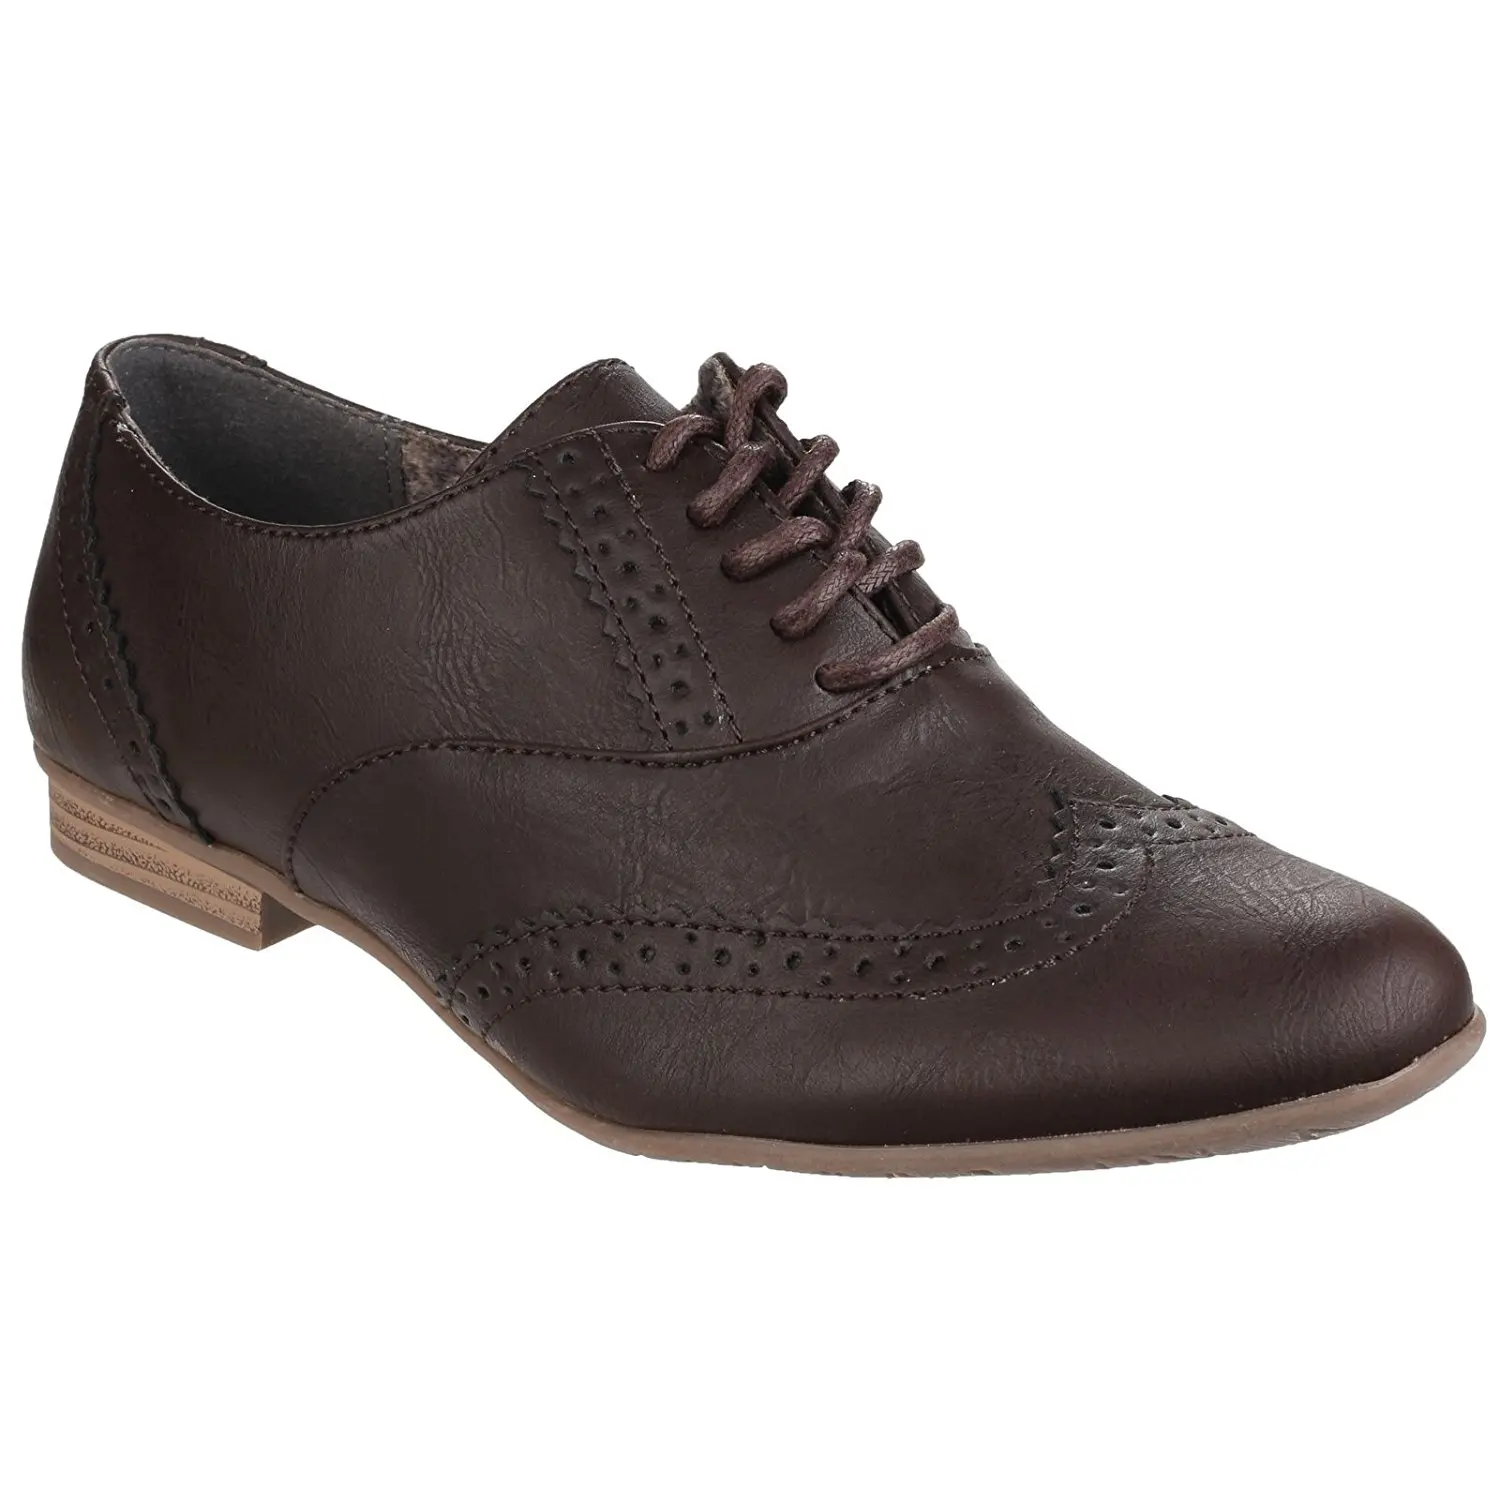 Cheap Brogues For Ladies, find Brogues For Ladies deals on line at ...